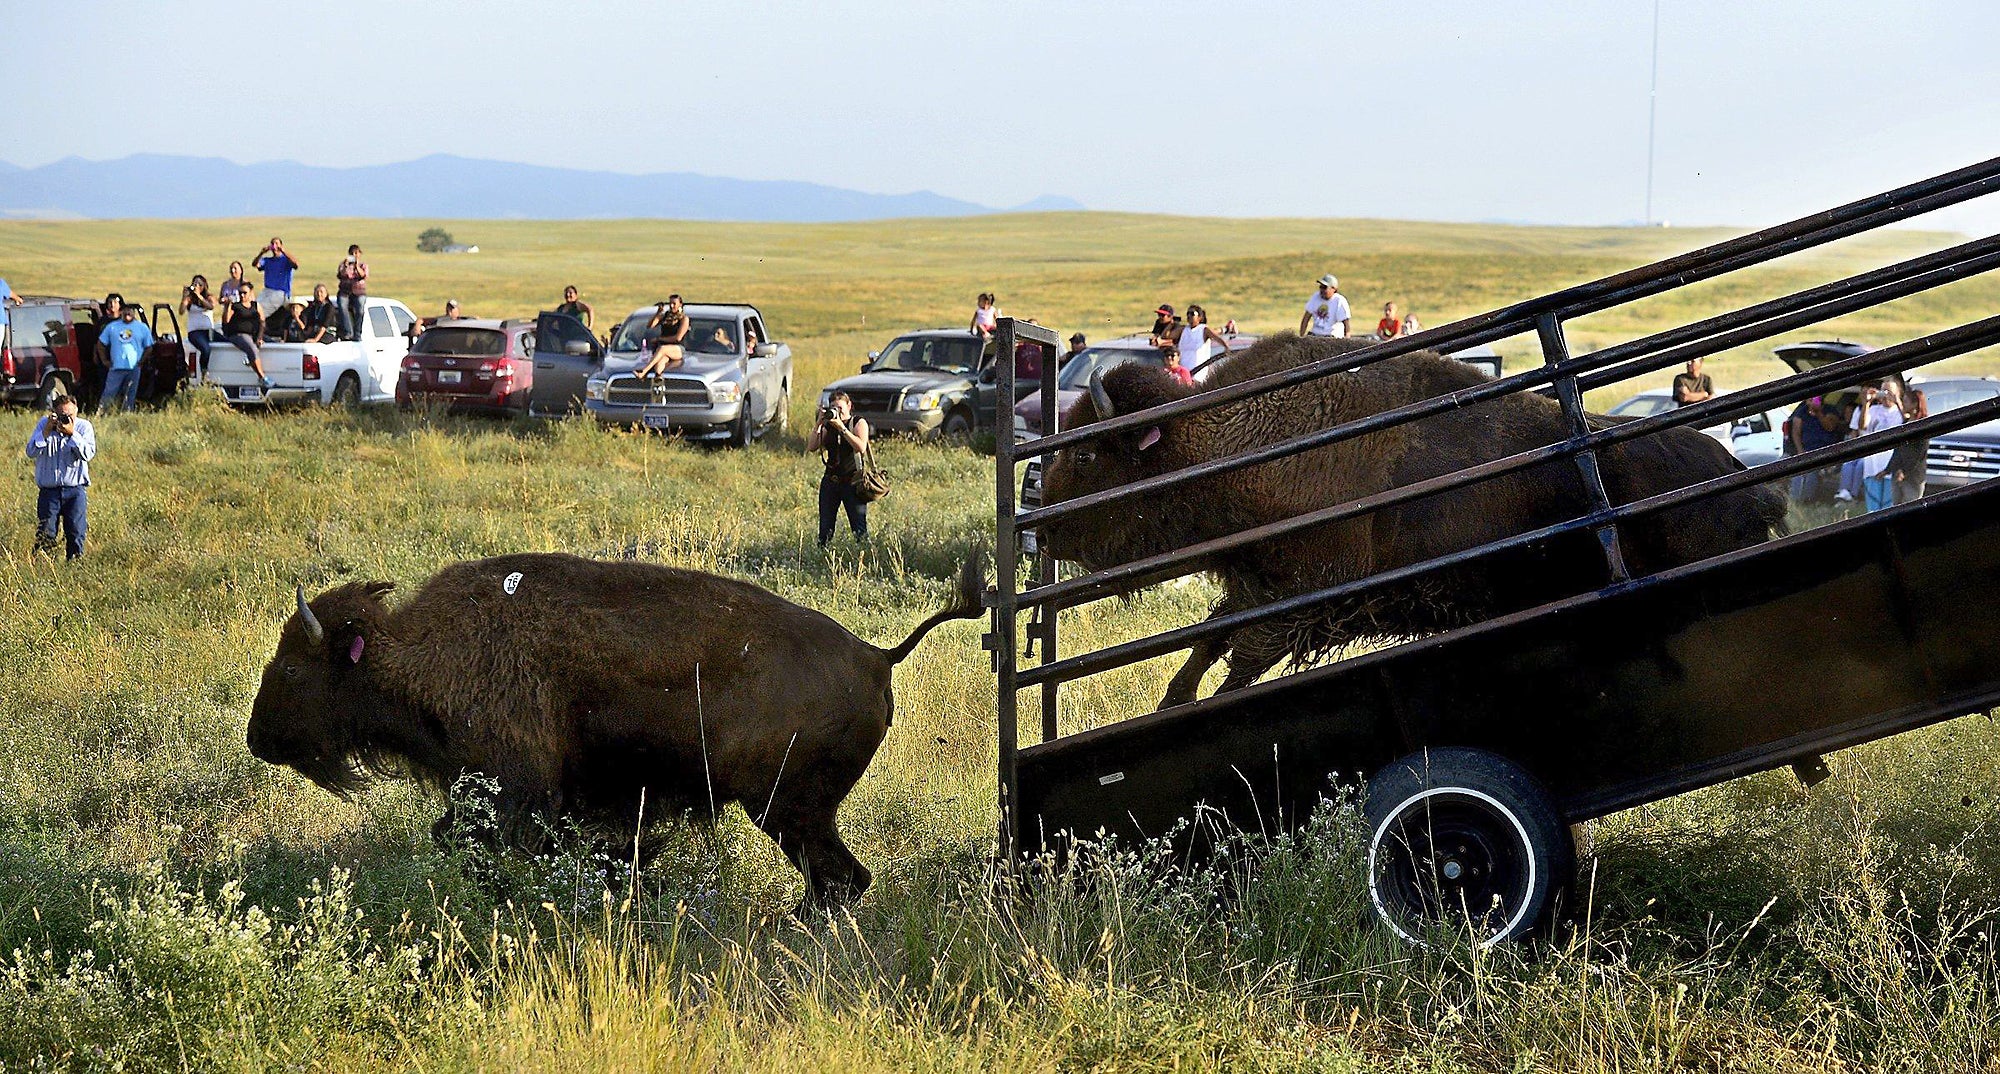 Bison come out of a trailer onto a grassy plain with a crowd of people looking on.